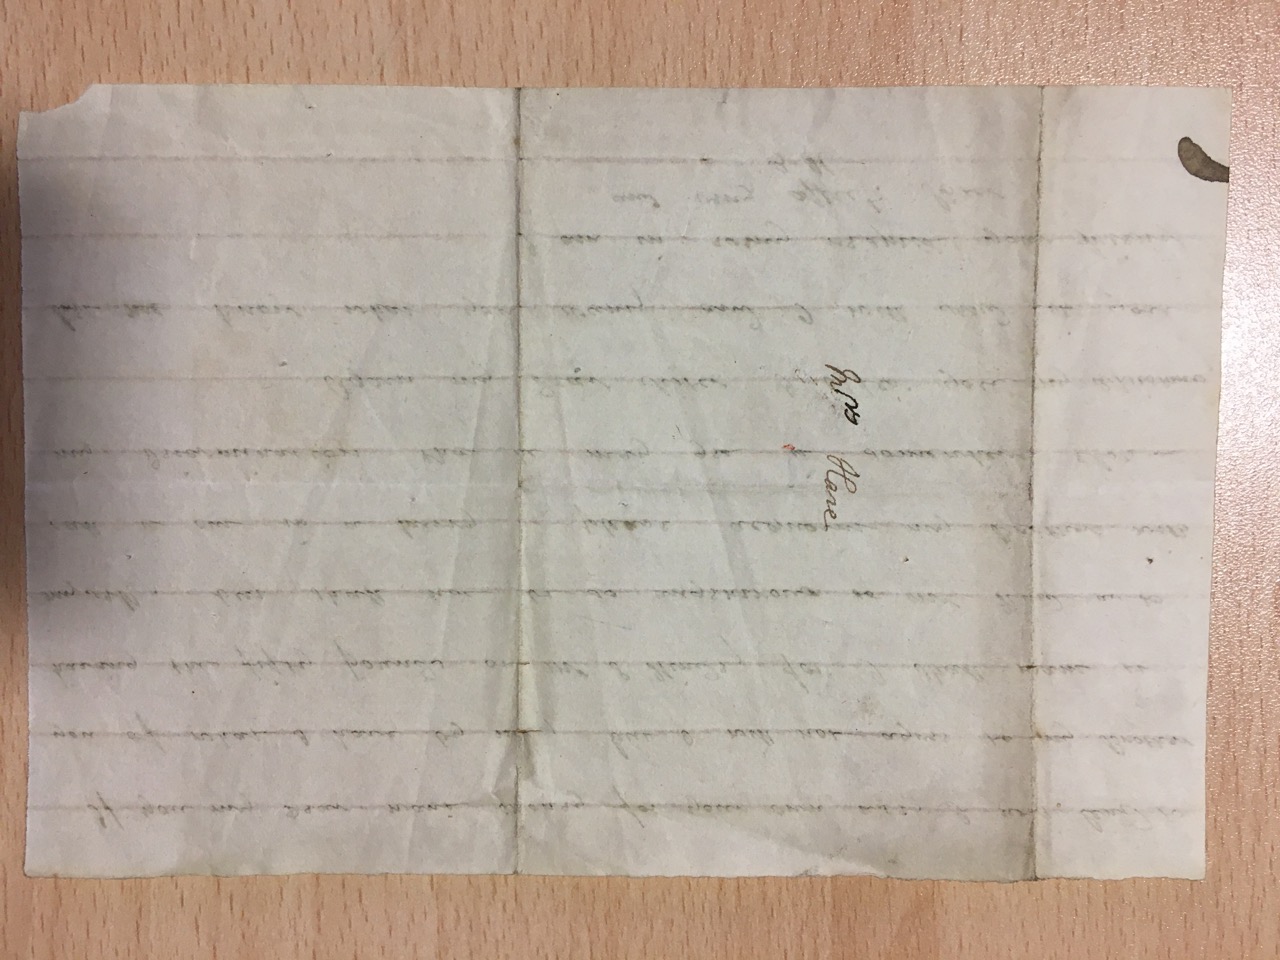 Image #2 of letter: Elizabeth Hare to Ann Hare, undated